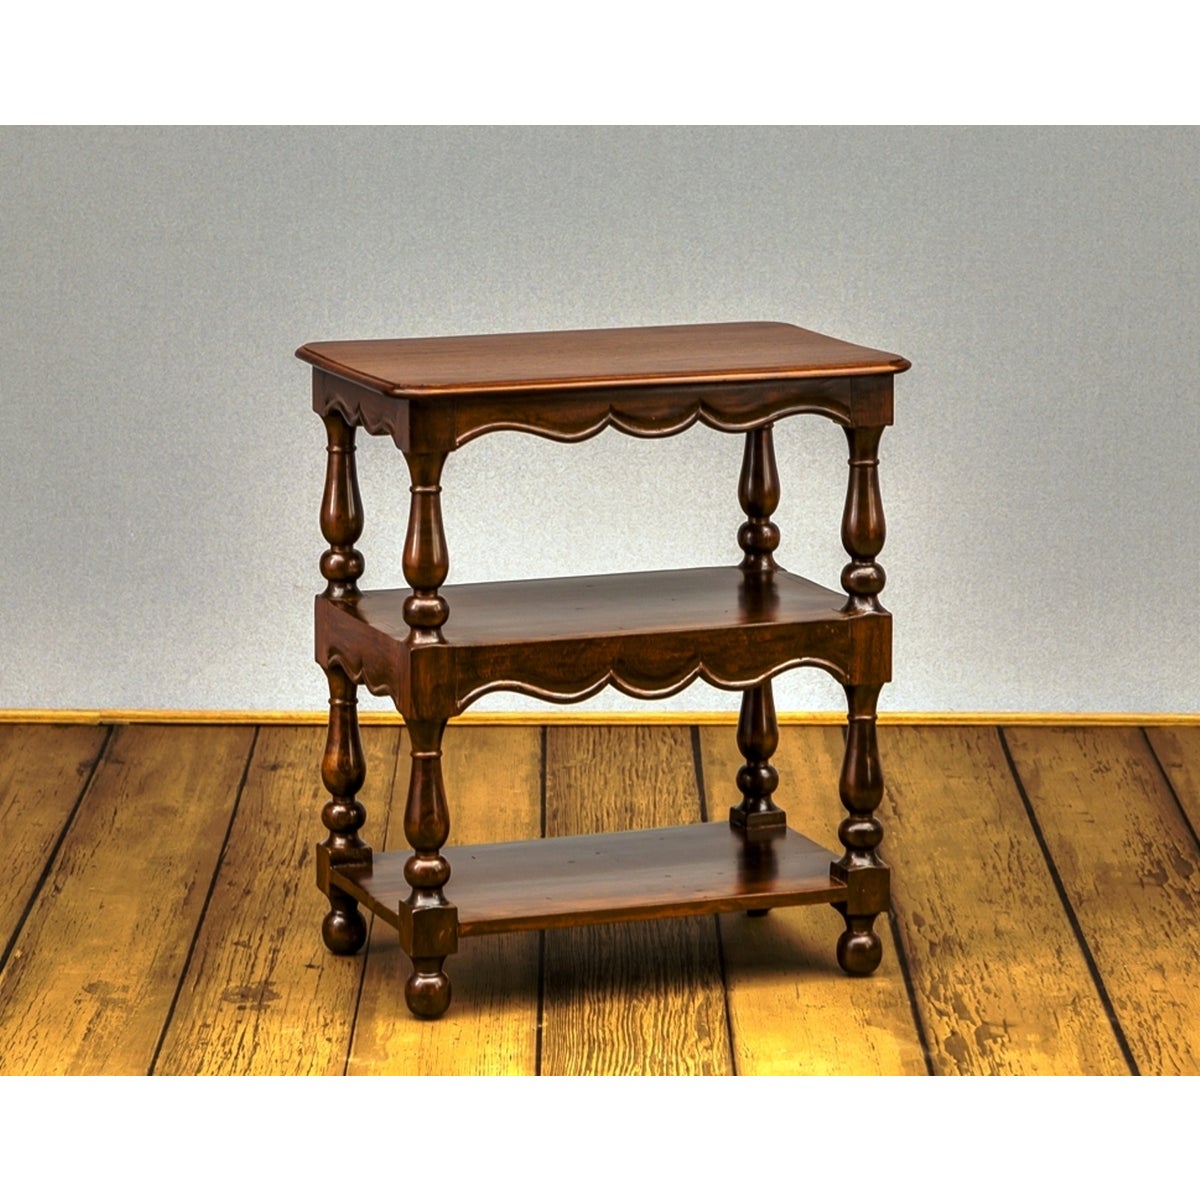 Swanson Spindle Table